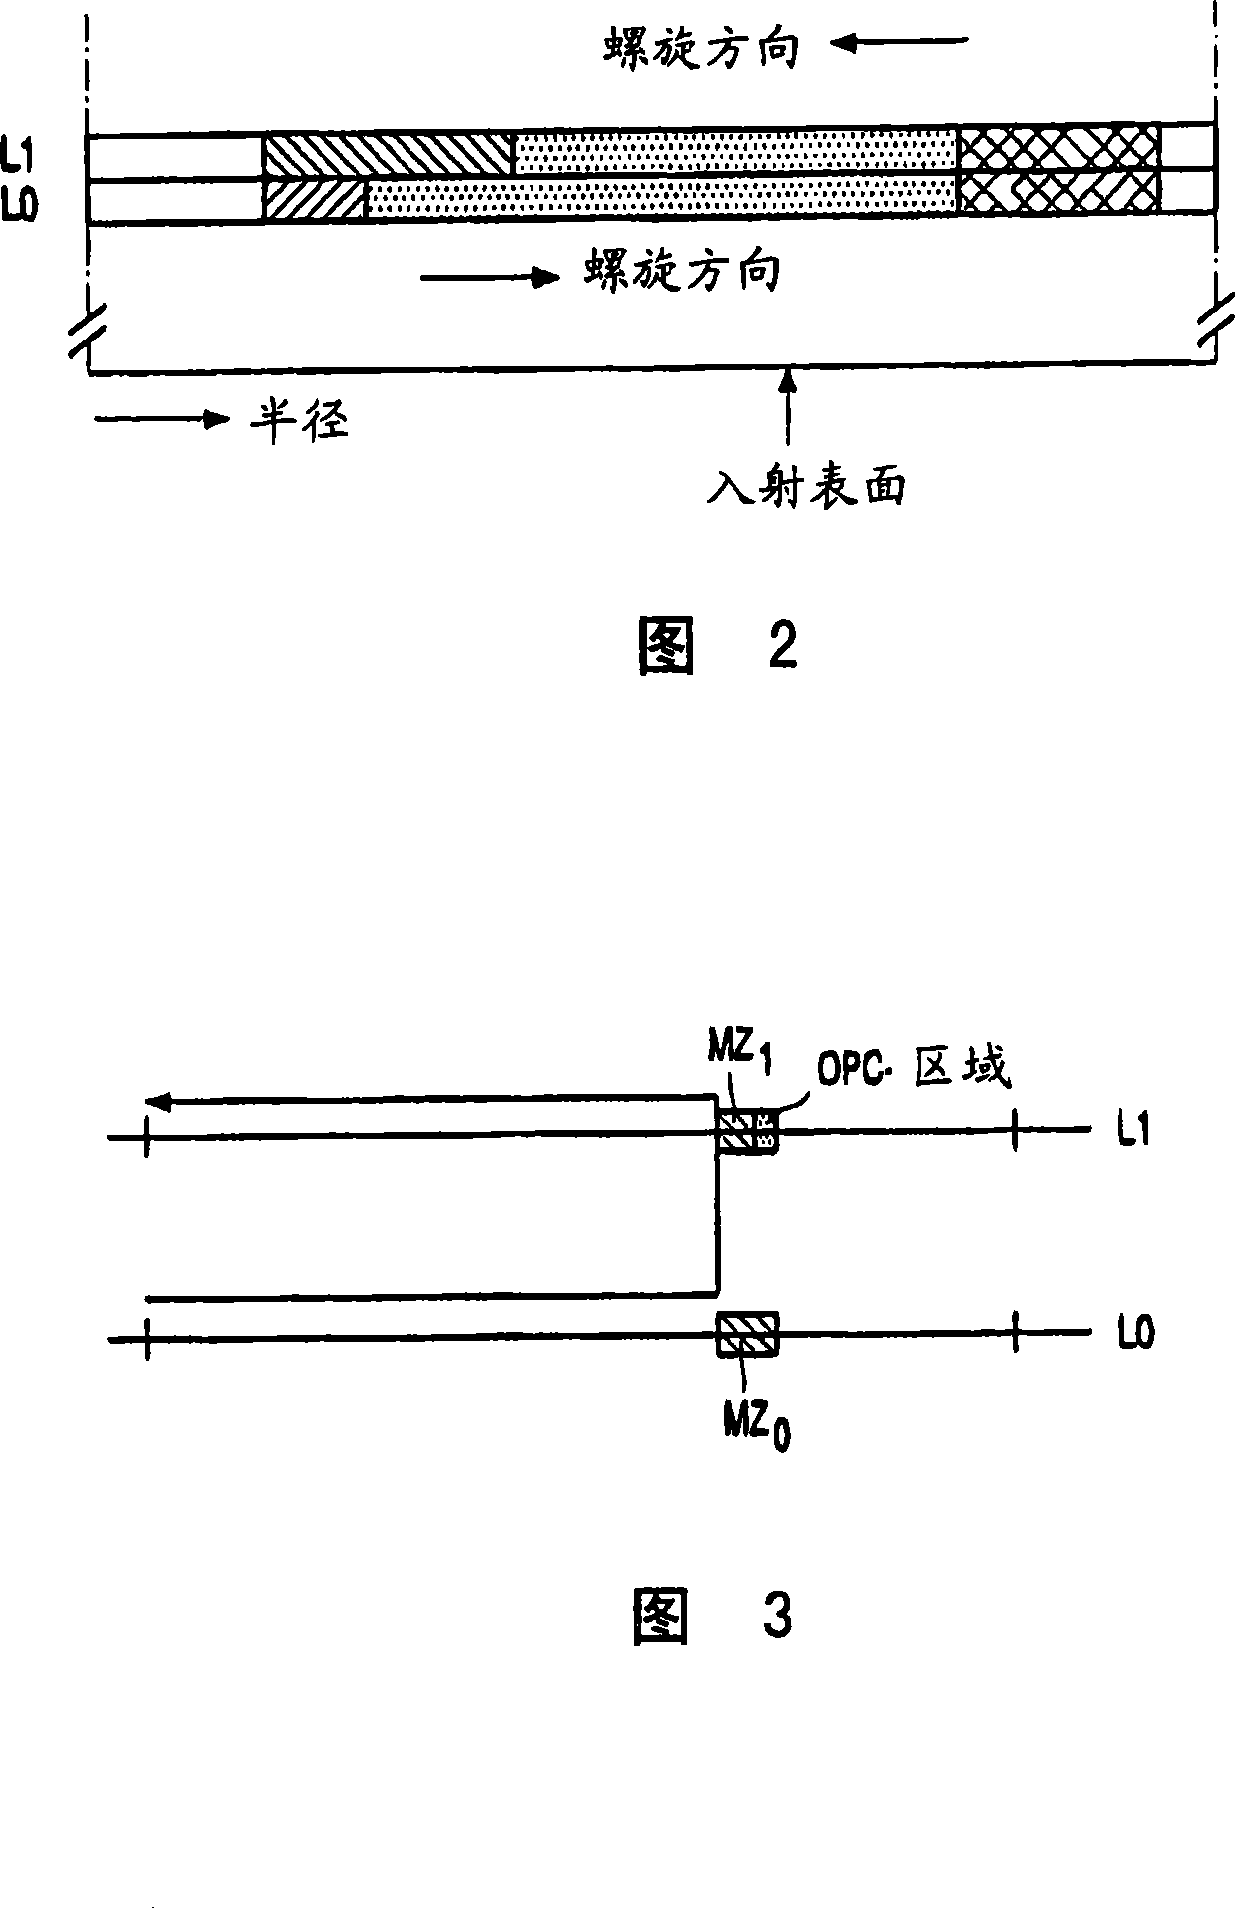 Recording methods and devices for recording information on dual layer recordable disks